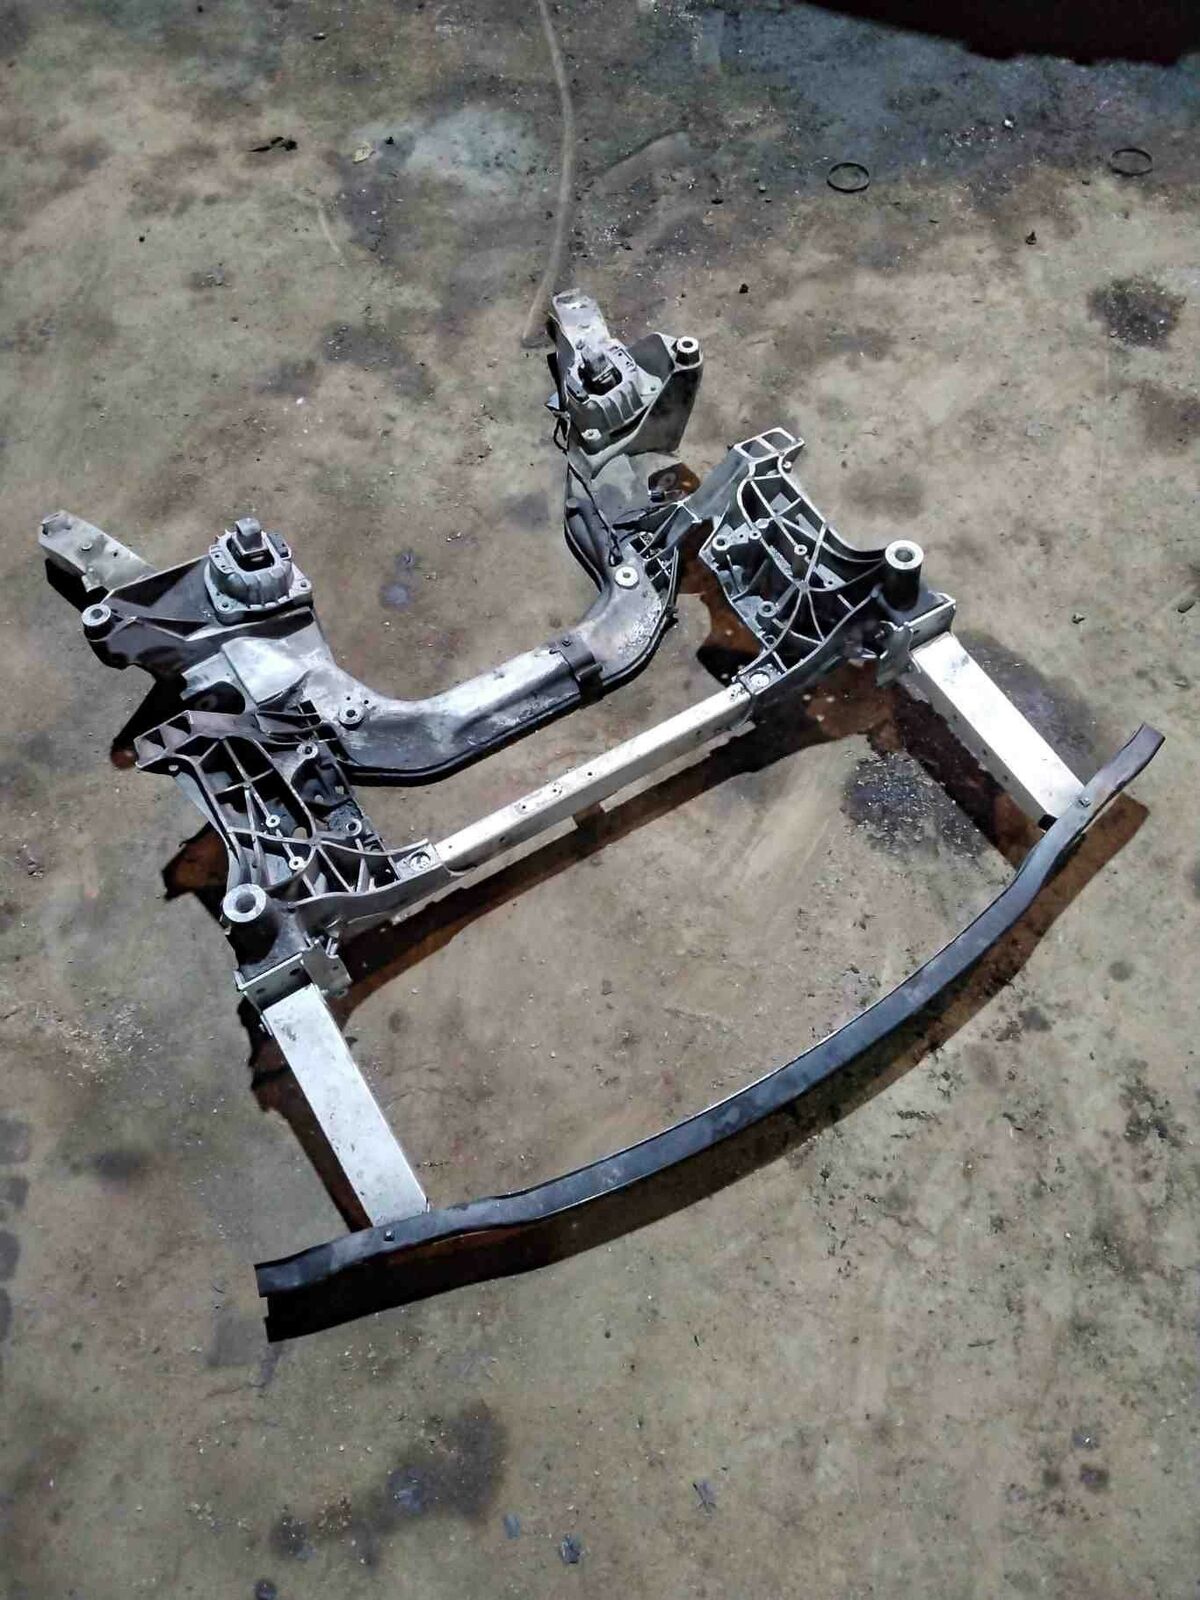 Undercarriage Crossmember/Subframe BMW 750 SERIES 10 11 12 13 14 15 F01 F02